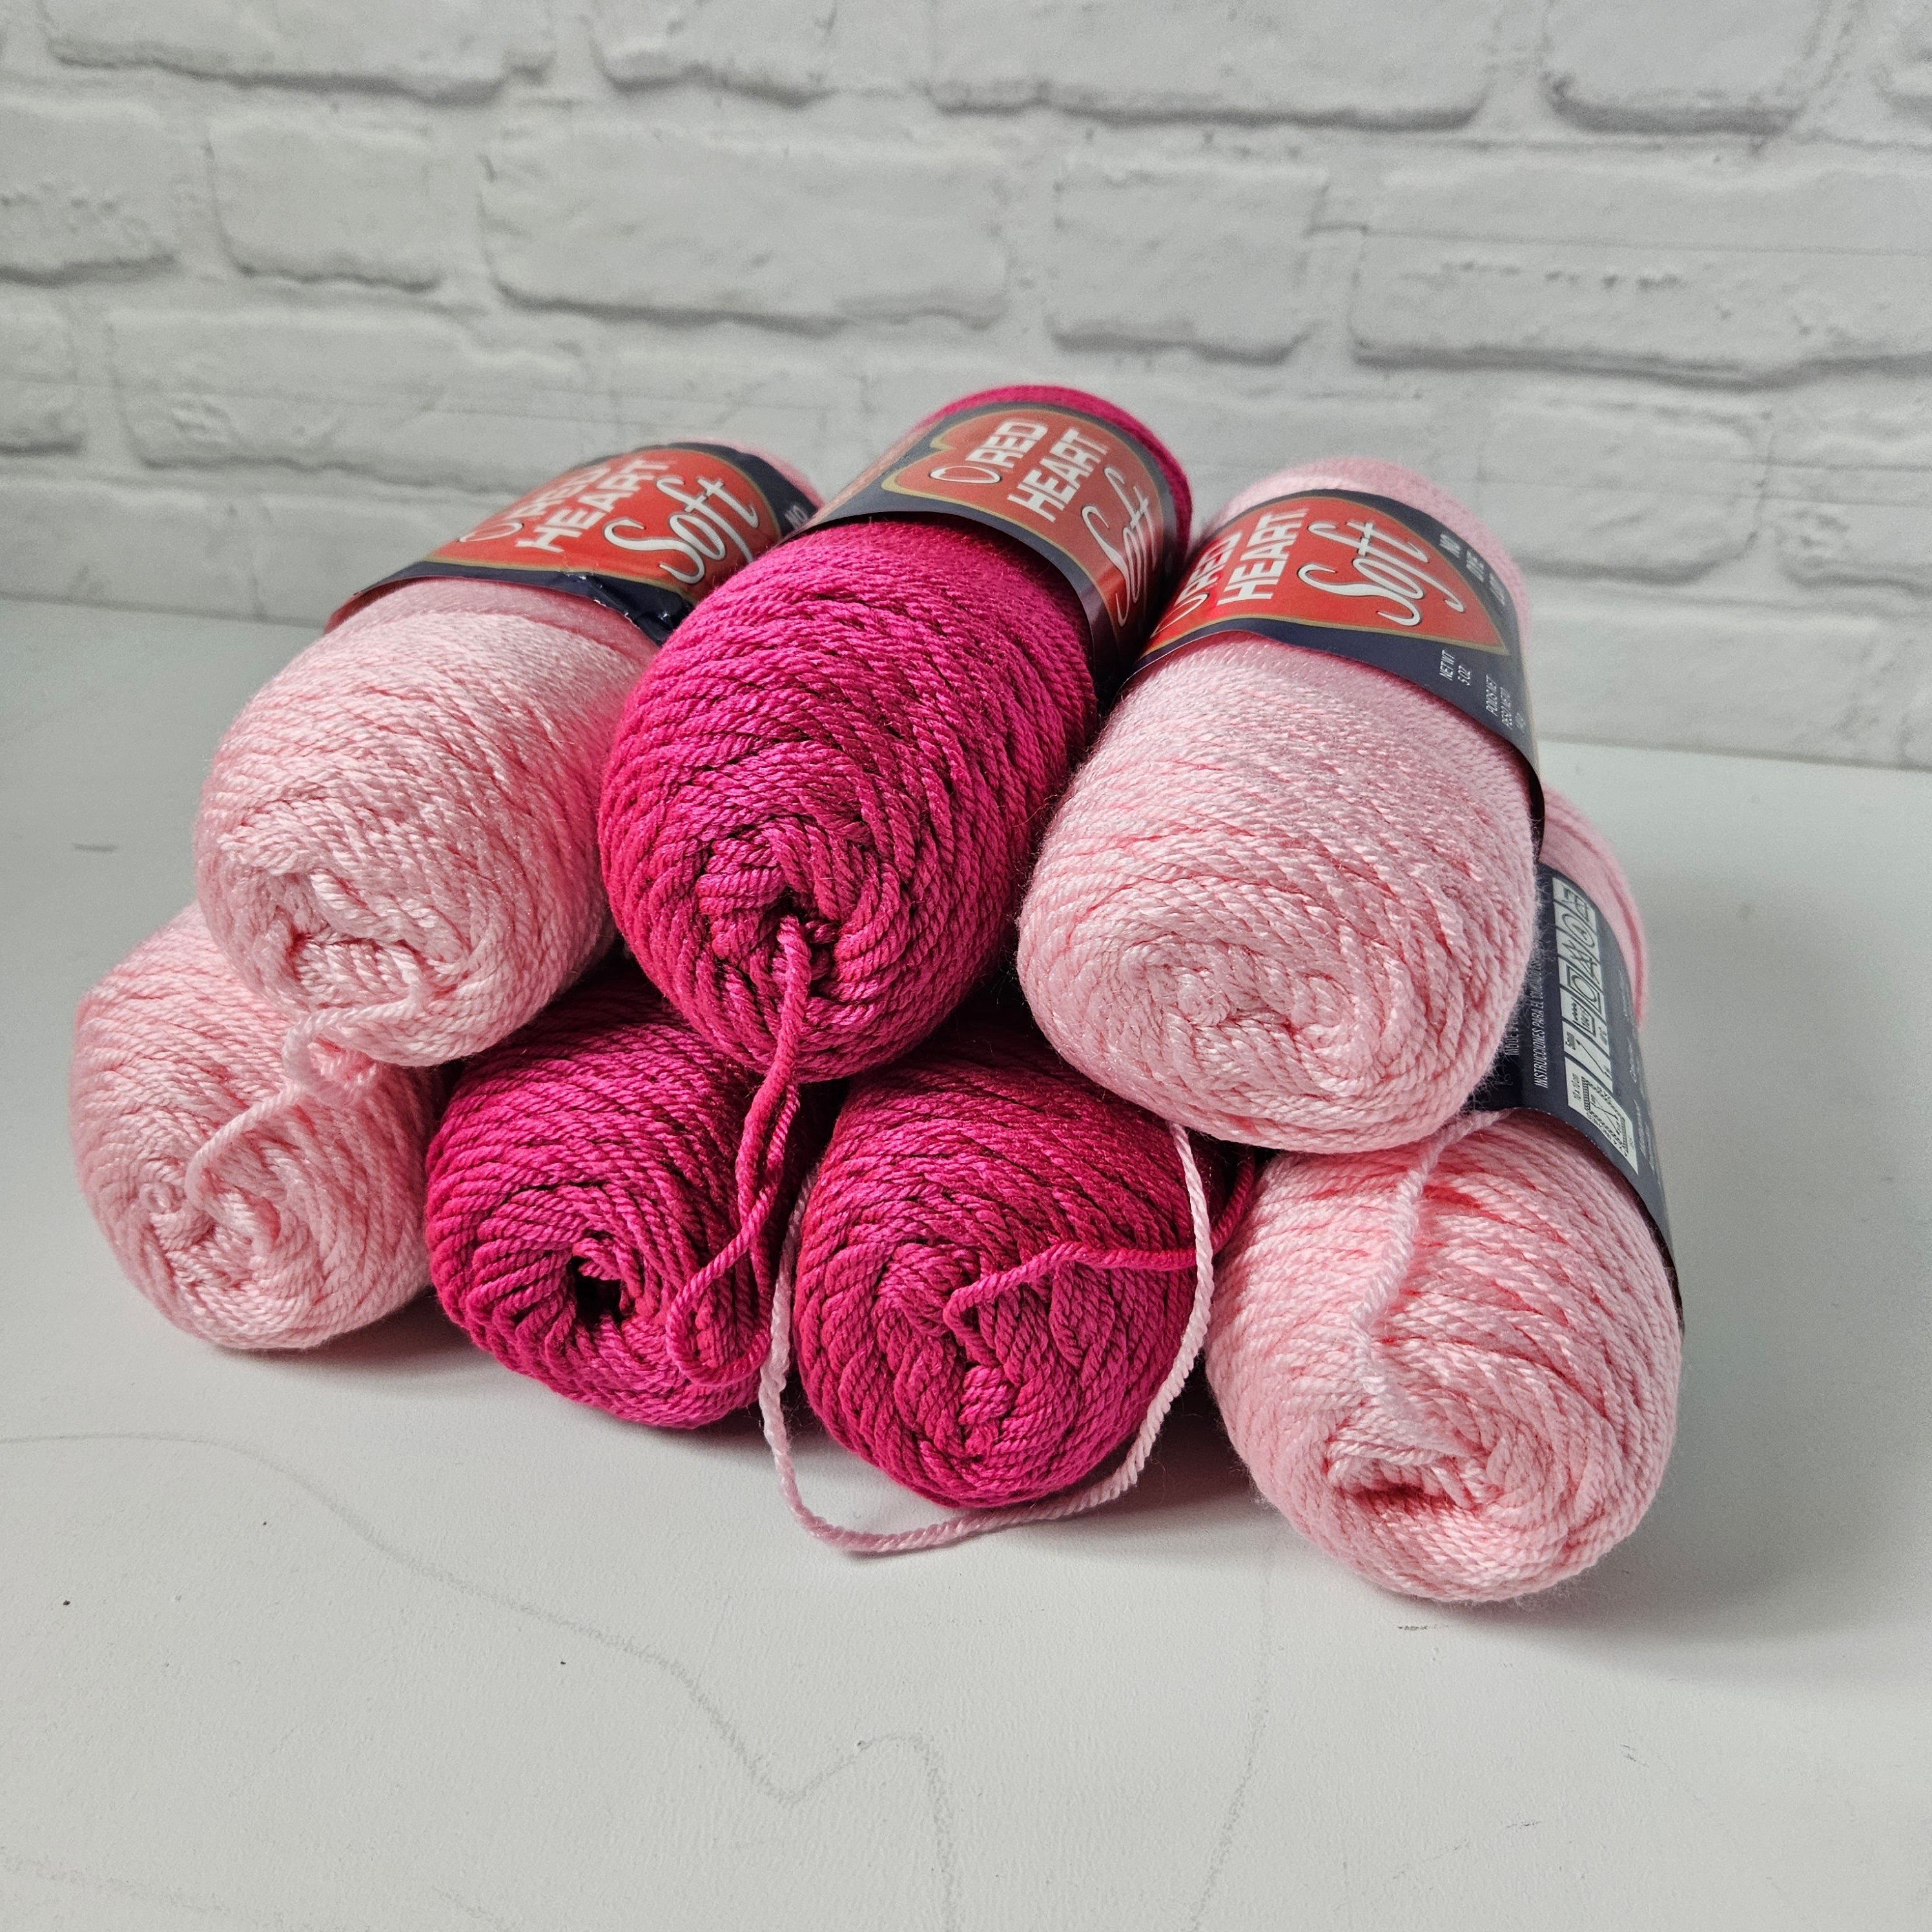 Big Twist Value Yarn Hot Pink Acrylic Worsted Weight Yarn Crochet and Knit  Craft Supplies 